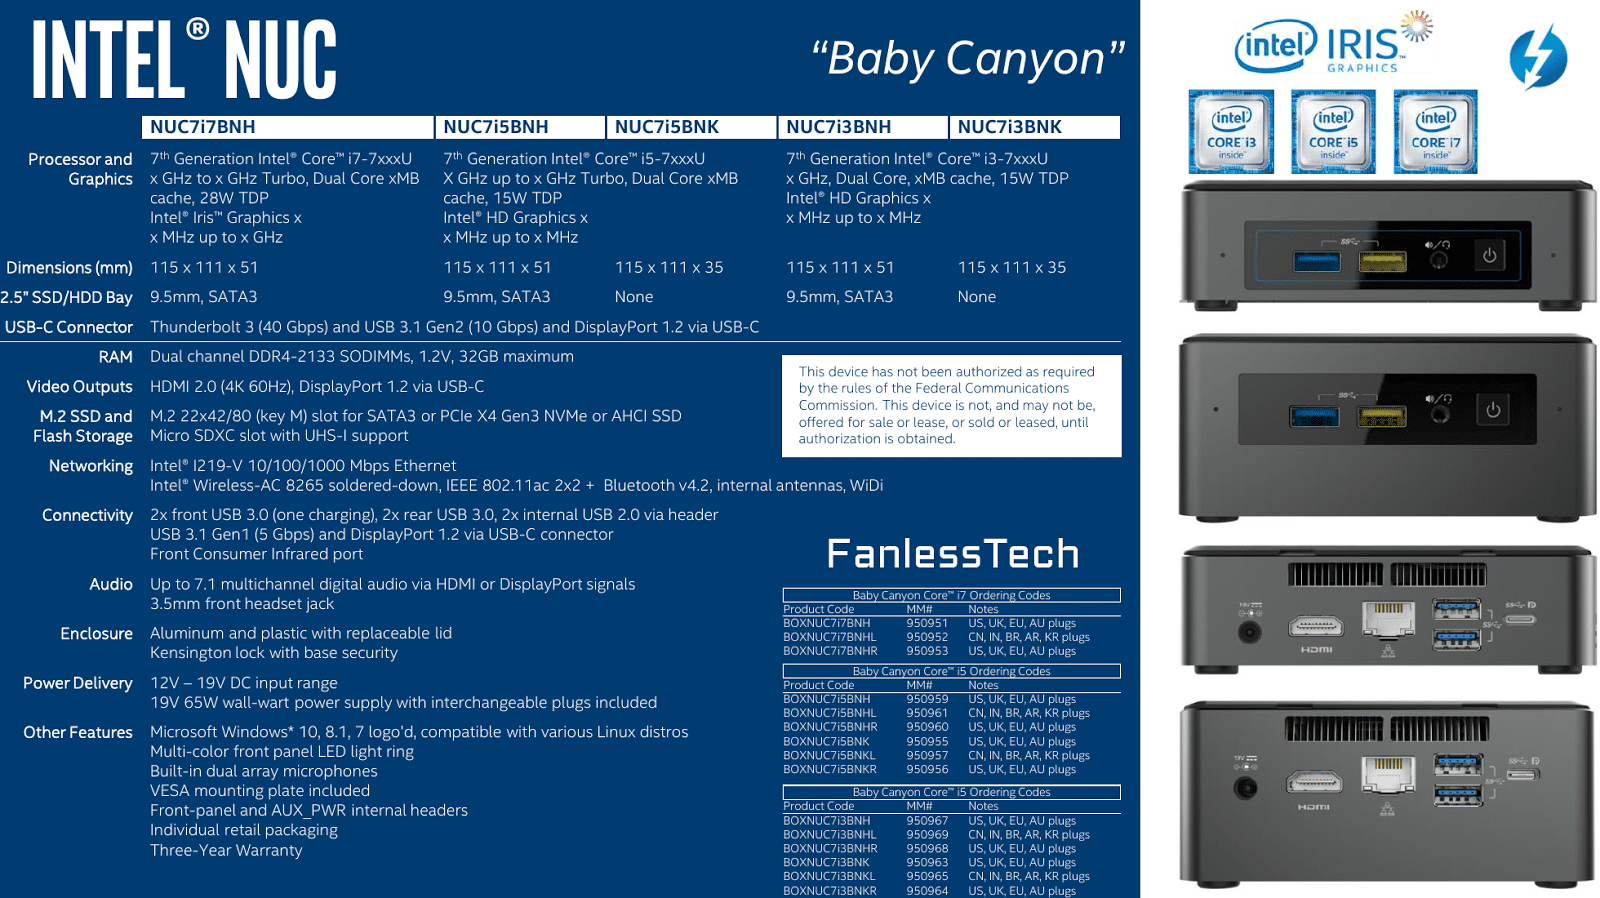 Intel latest NUC Baby Canyon based on new Kaby Lake and Apollo Lake processors 24